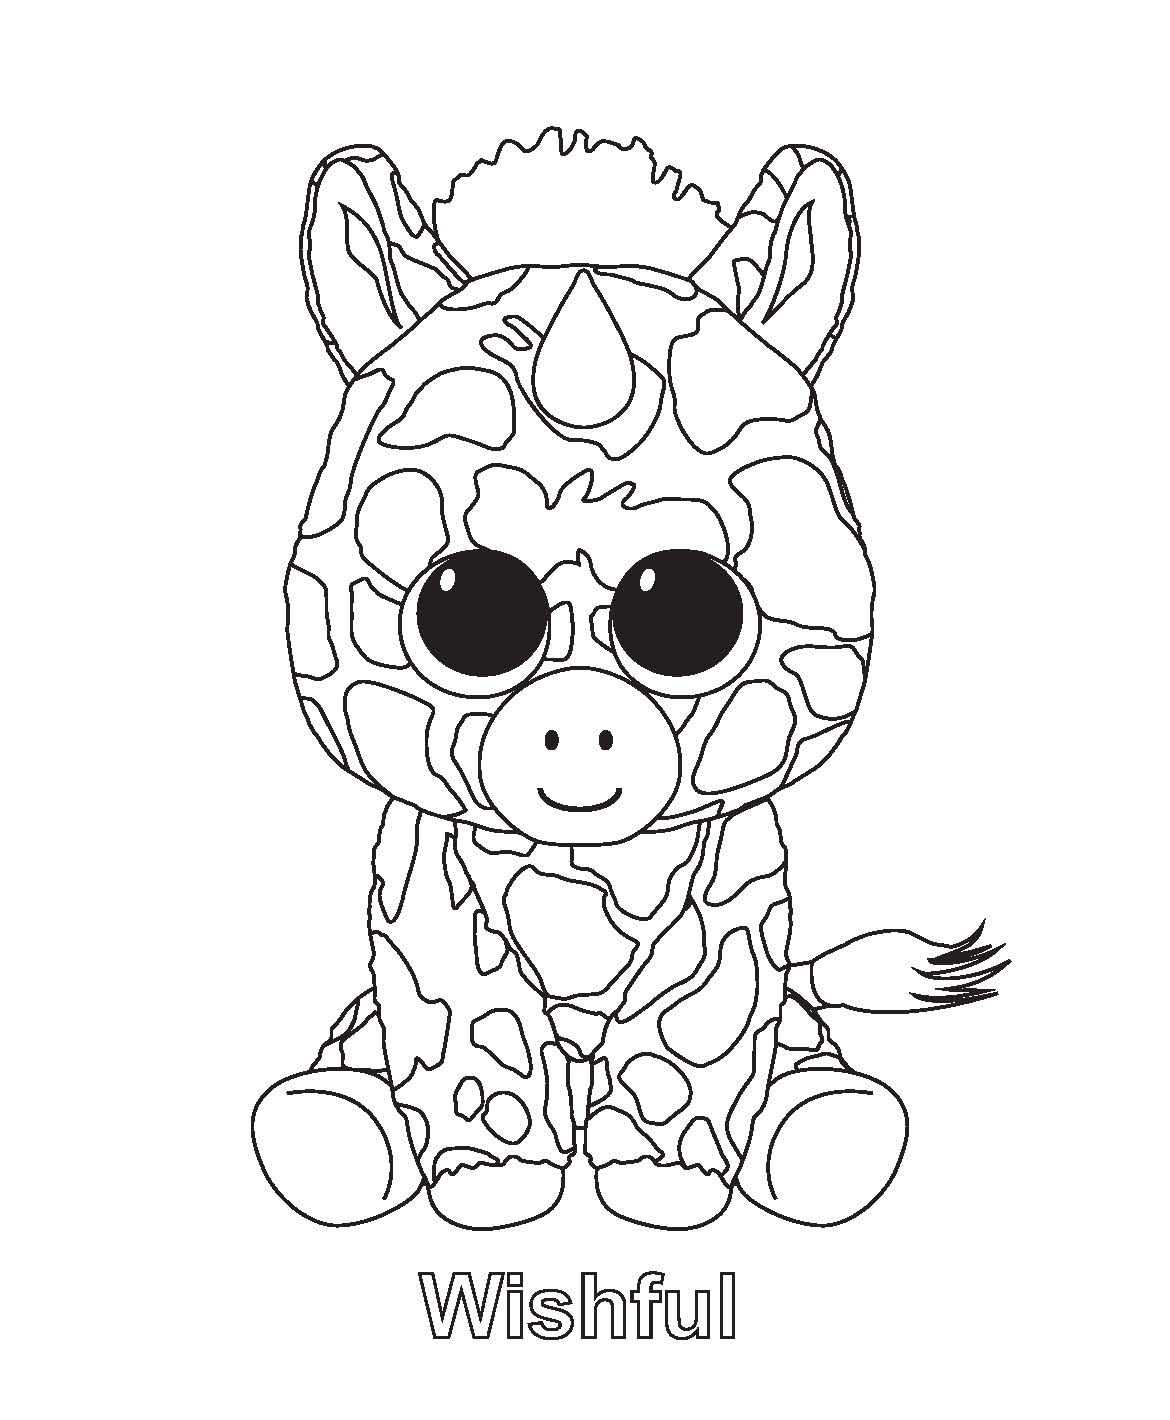 Beanie Boos Coloring Pages   Best Coloring Pages For Kids